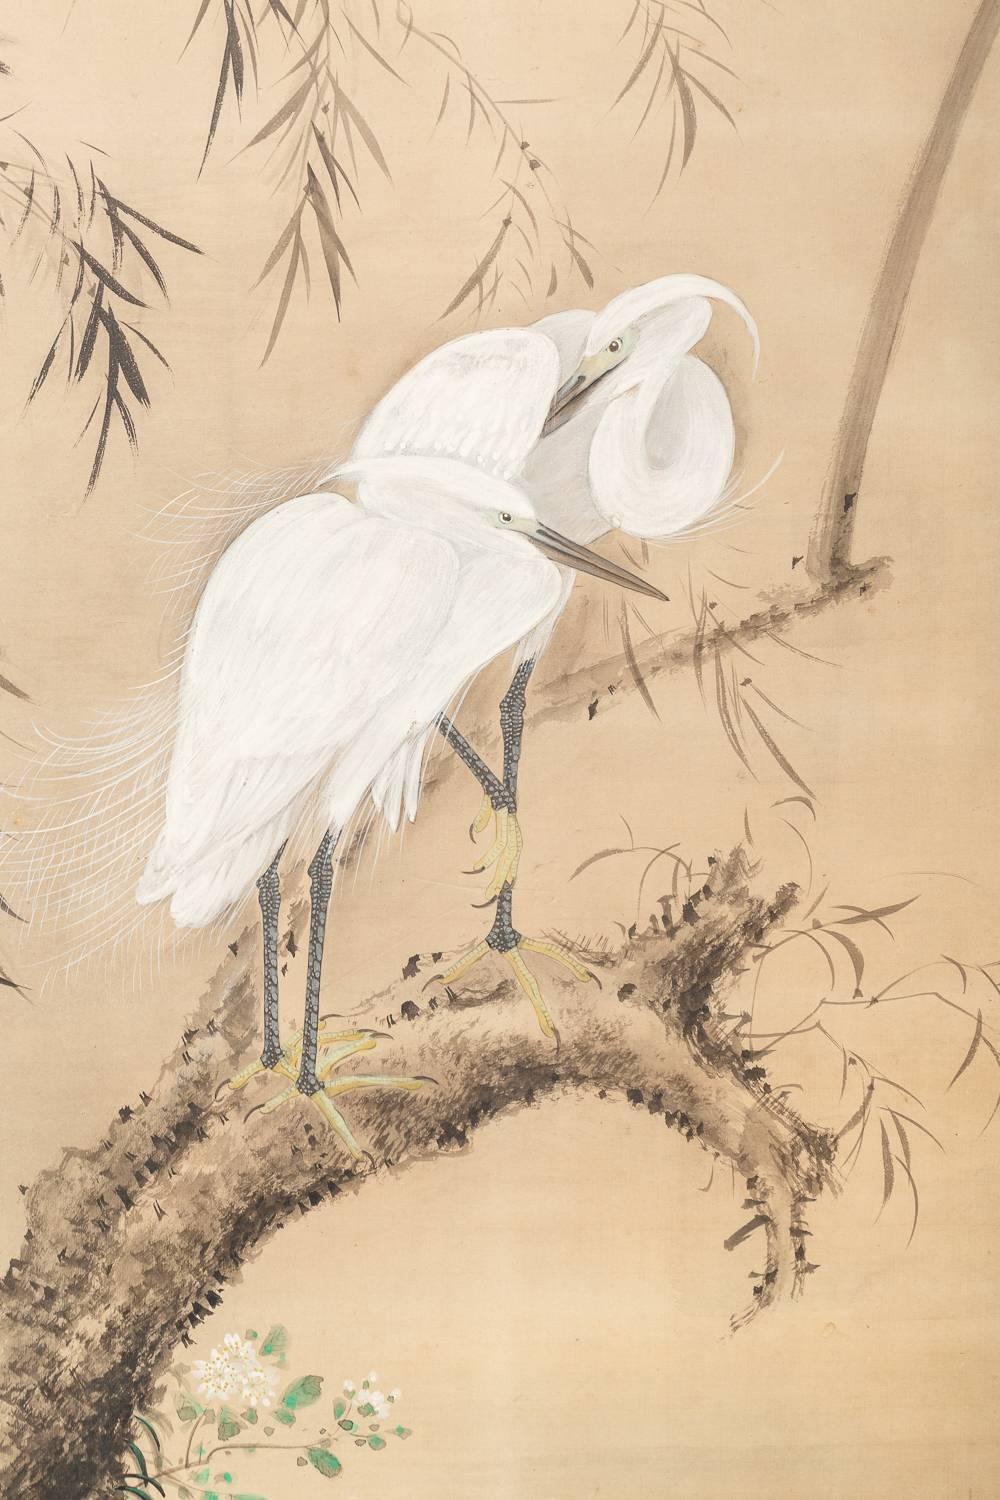 Japanese Two Panel Screen of Herons in Willow by Water Lily Pond.  Meiji period (1868 - 1912) painting of a pair of herons resting in a willow tree at pond's edge.  Painted in mineral pigments on mulberry paper.  Artist's signature and seal read: